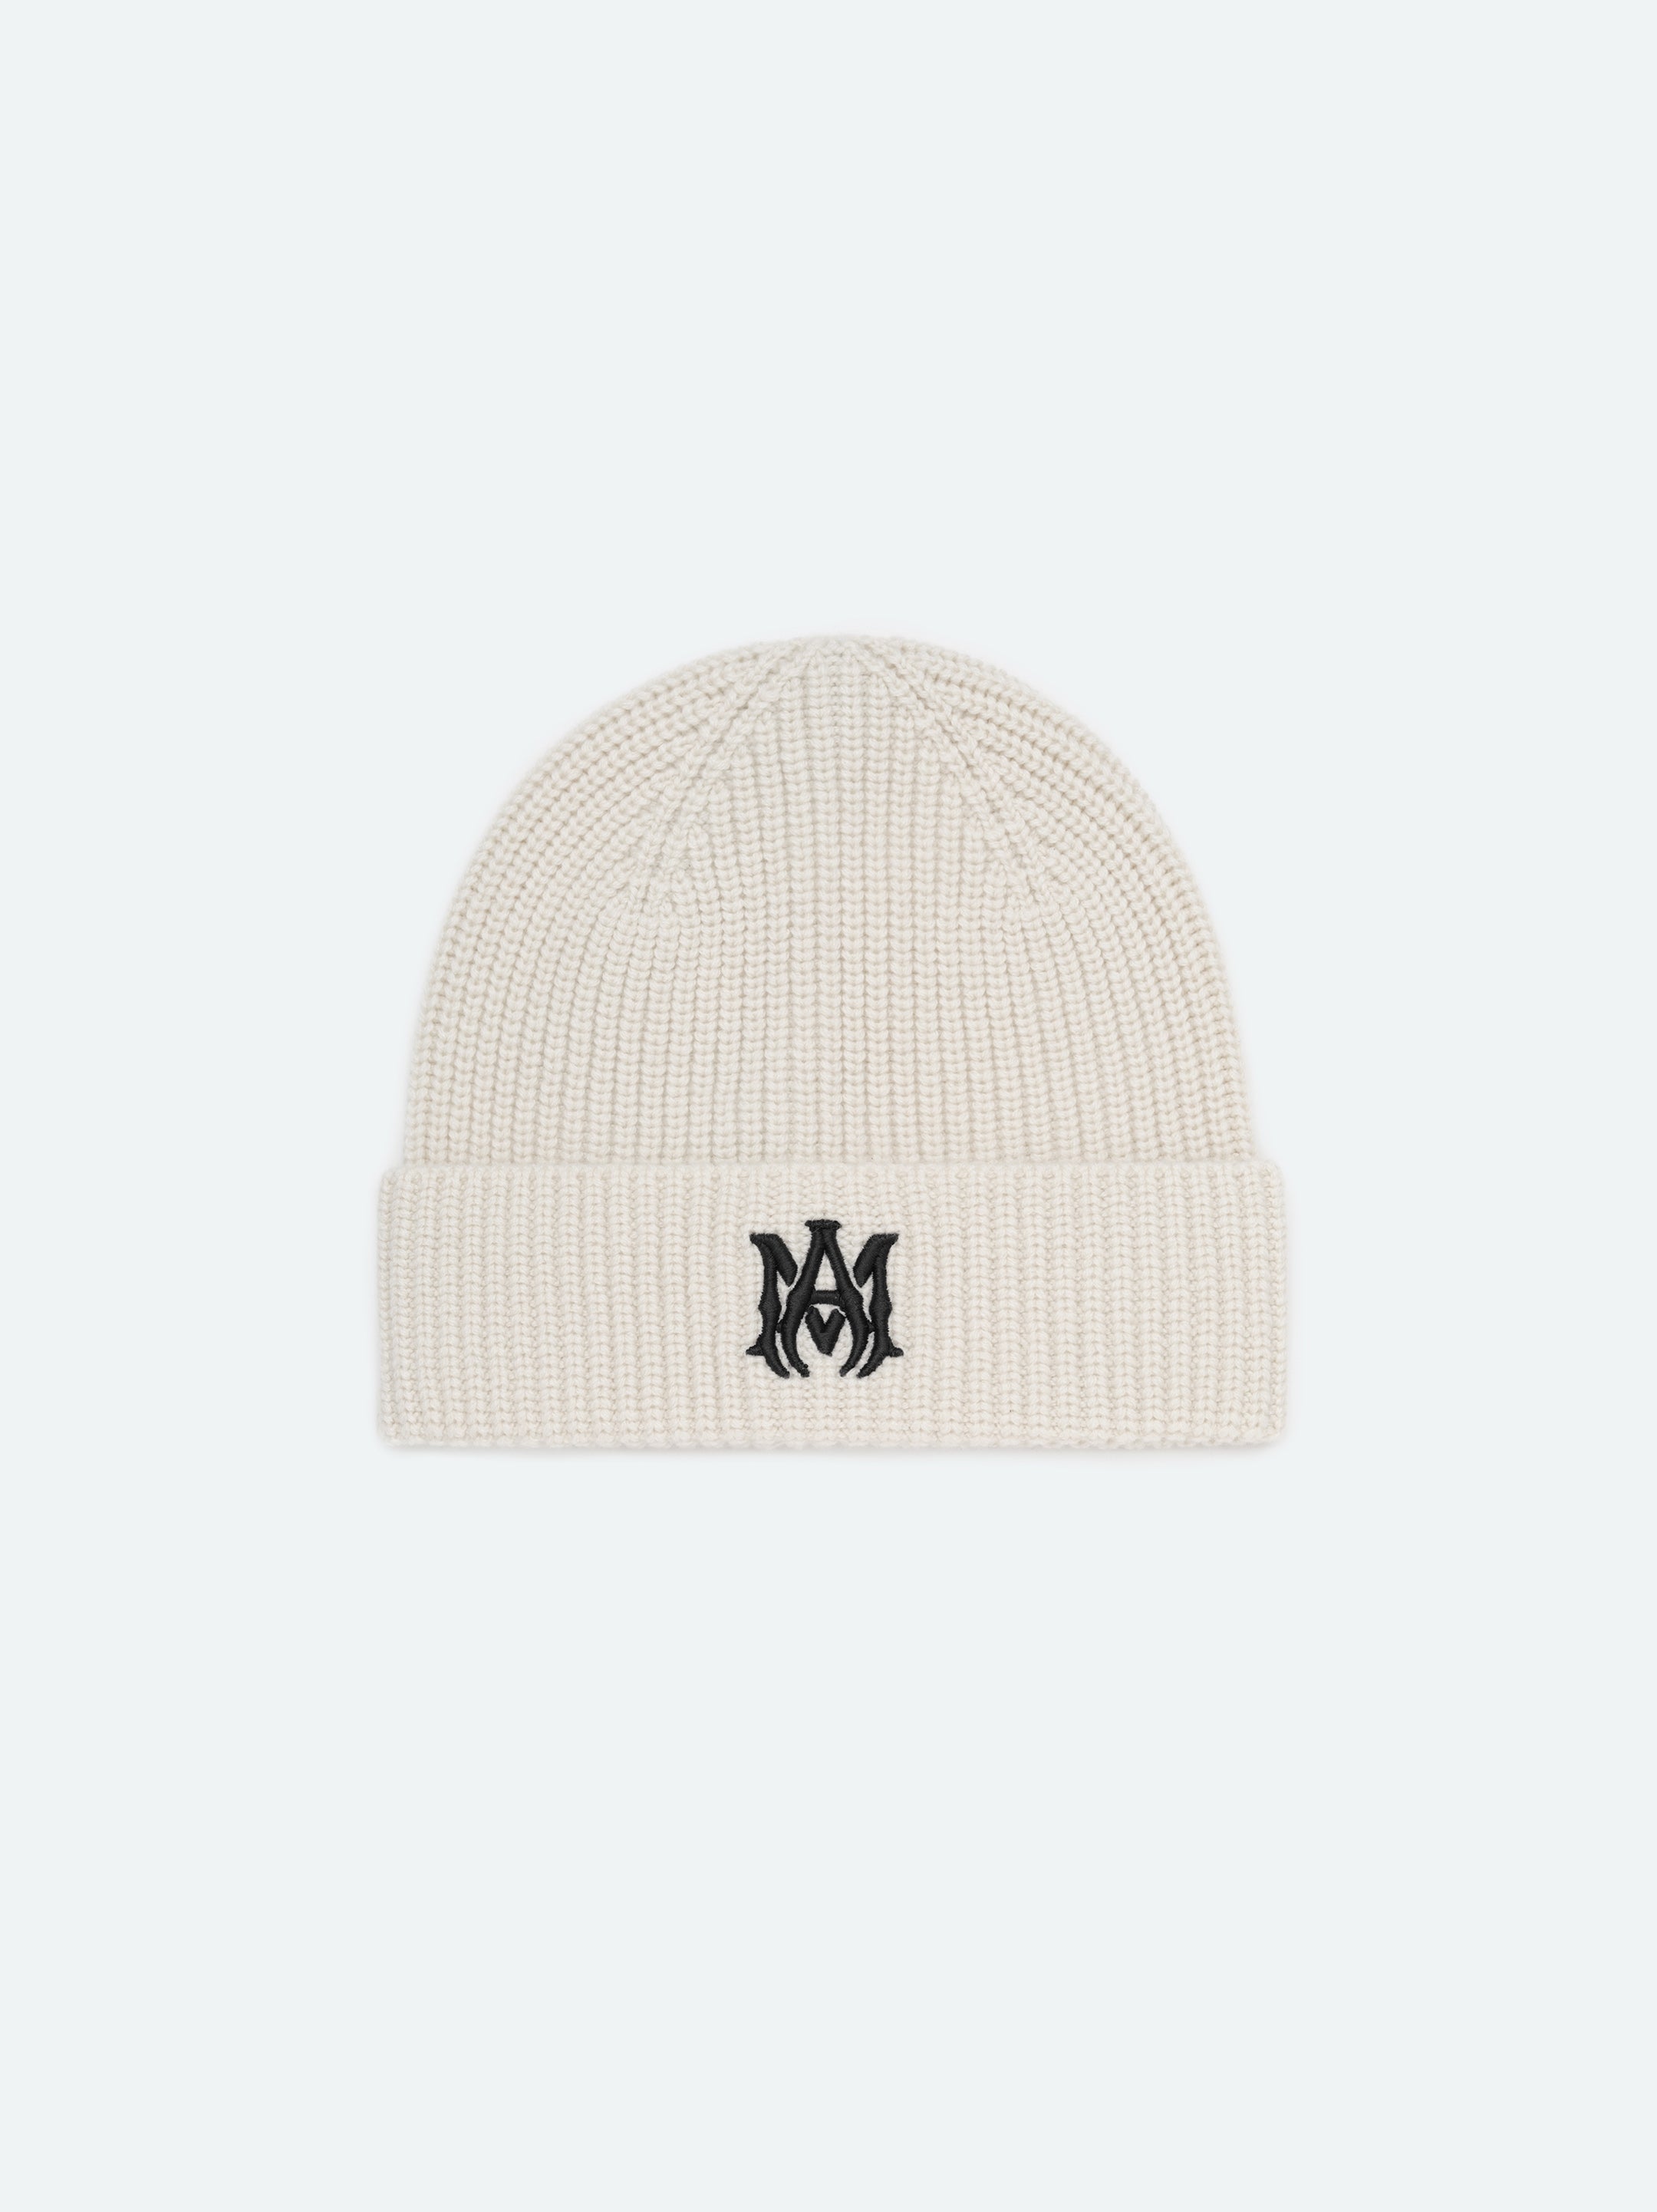 Product MA BEANIE - Alabaster featured image